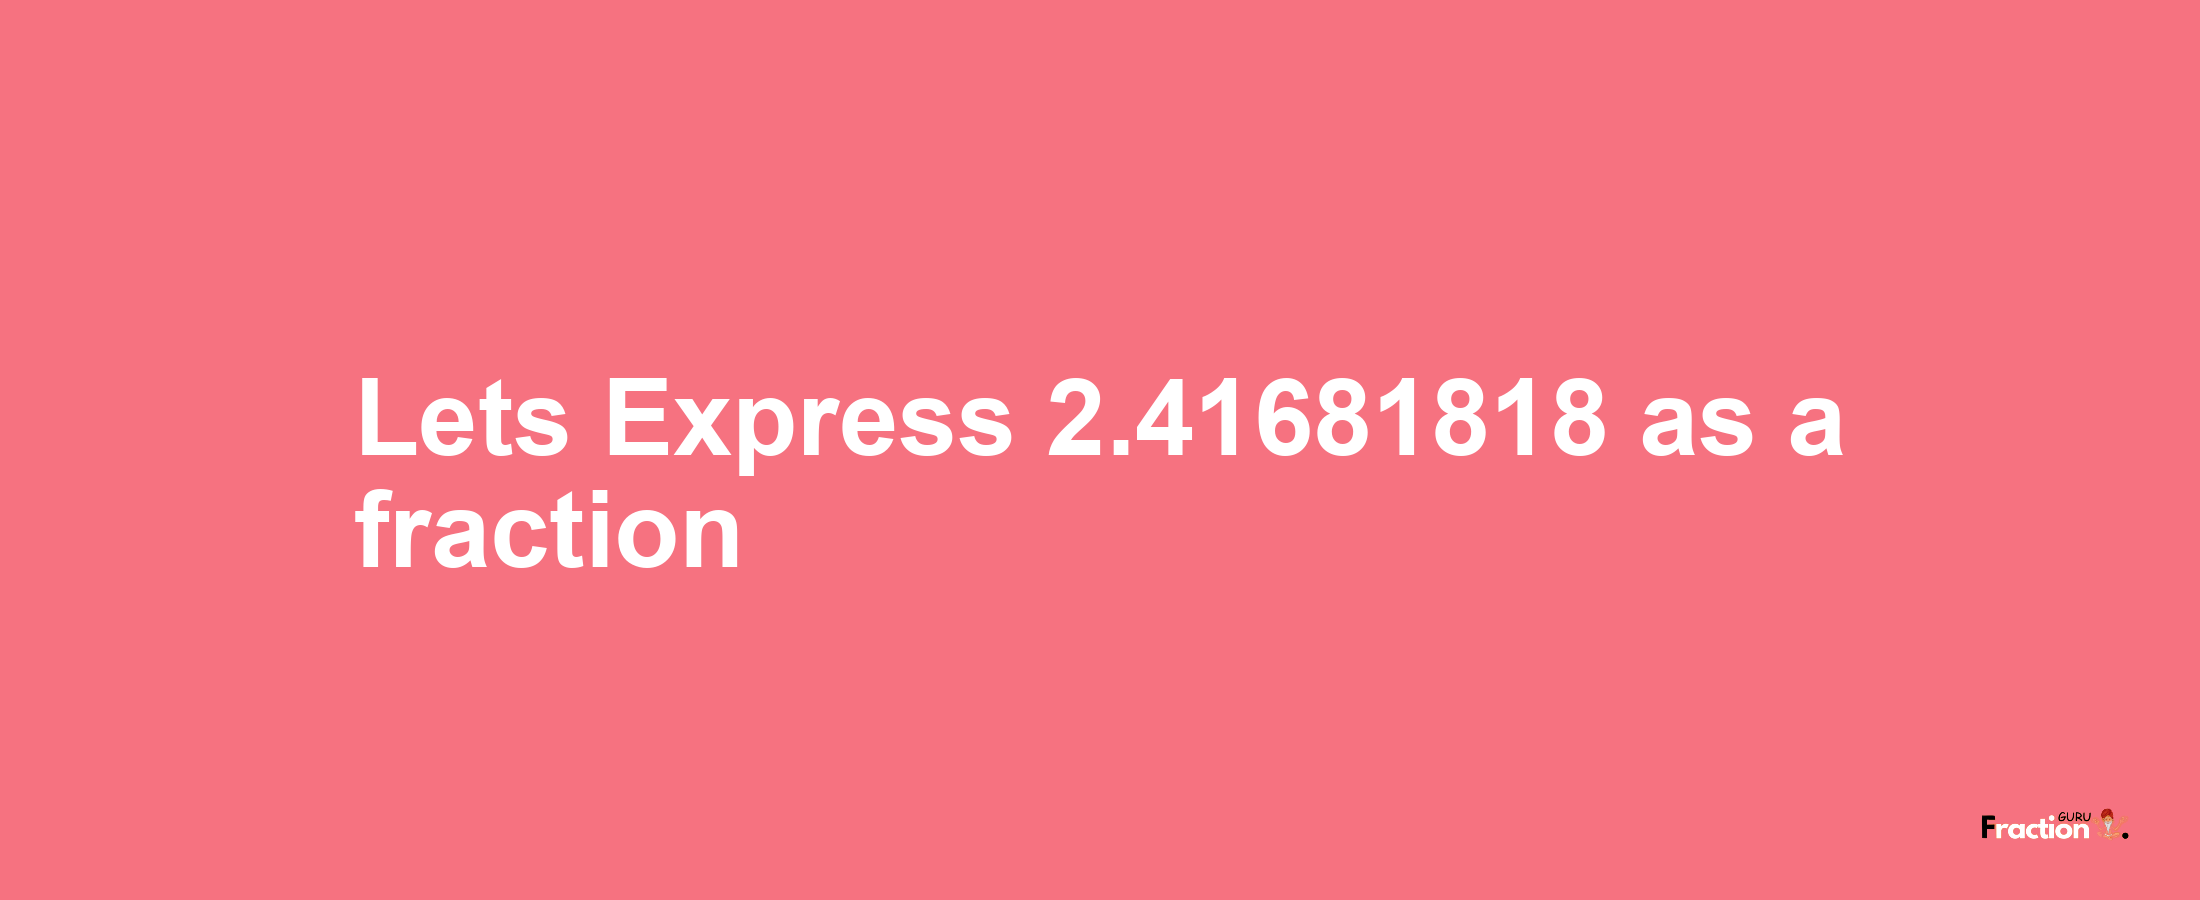 Lets Express 2.41681818 as afraction